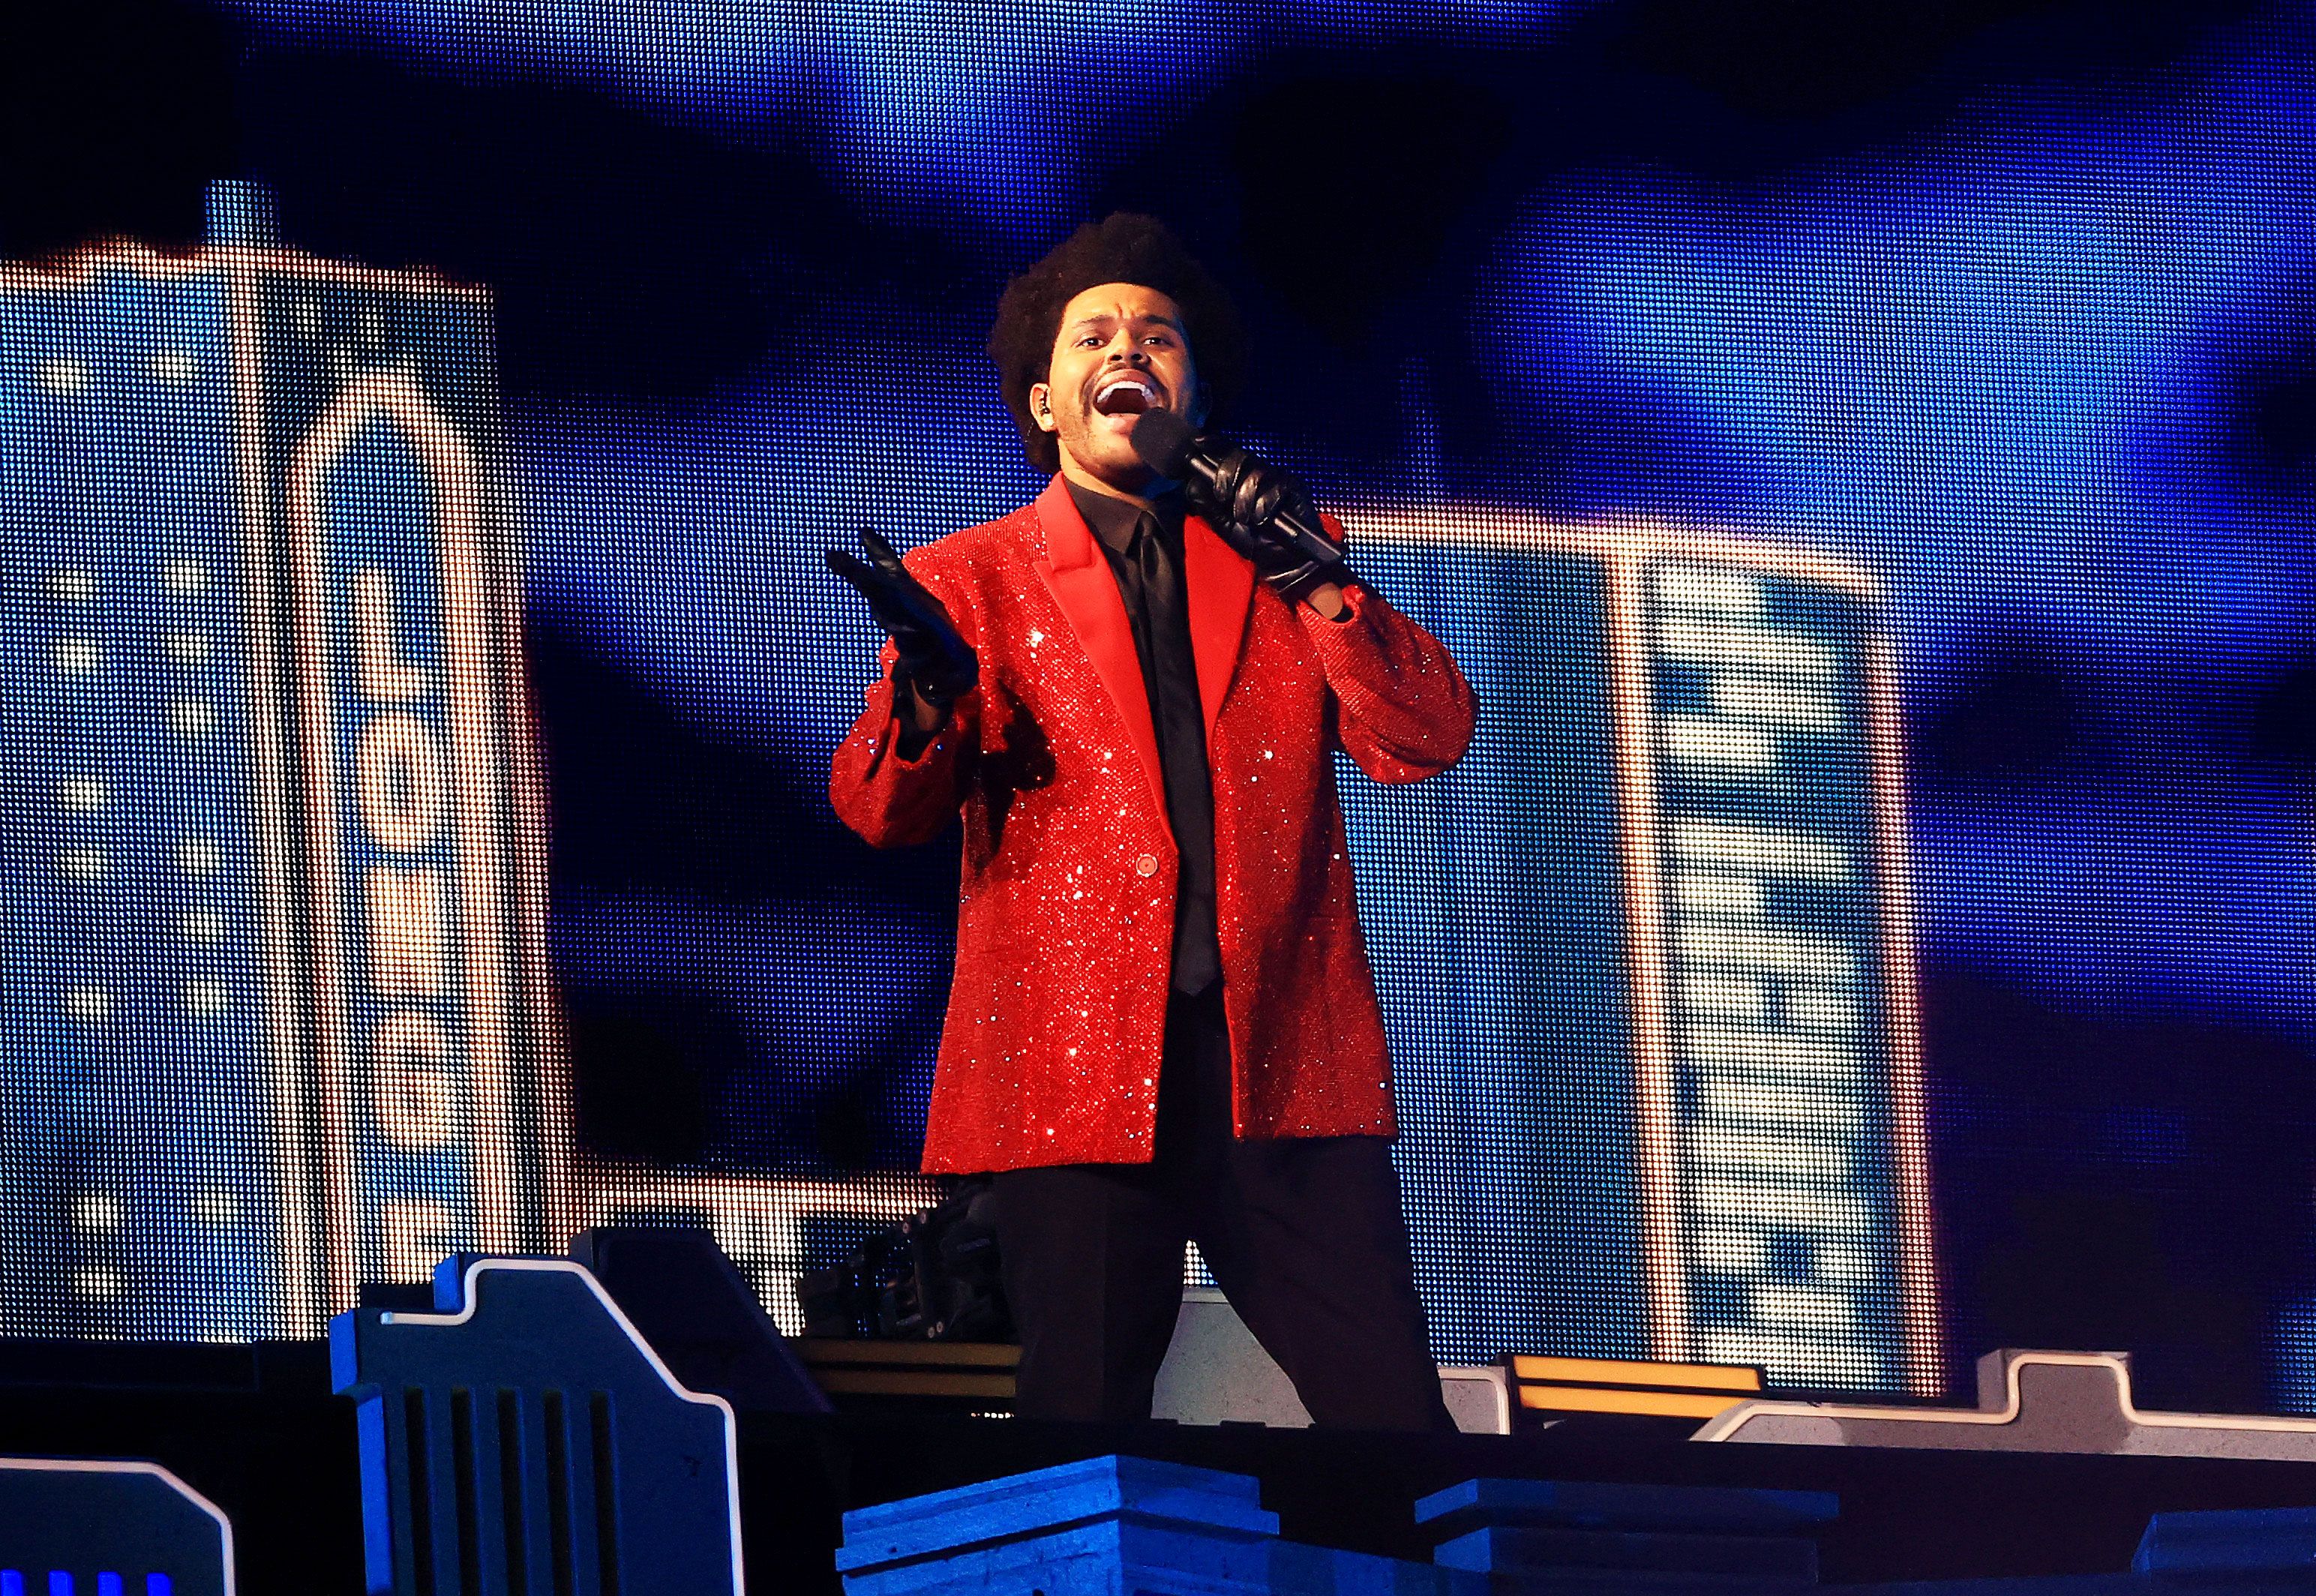 Is The Weeknd is hanging up his red suit for good? – 97.9 WRMF